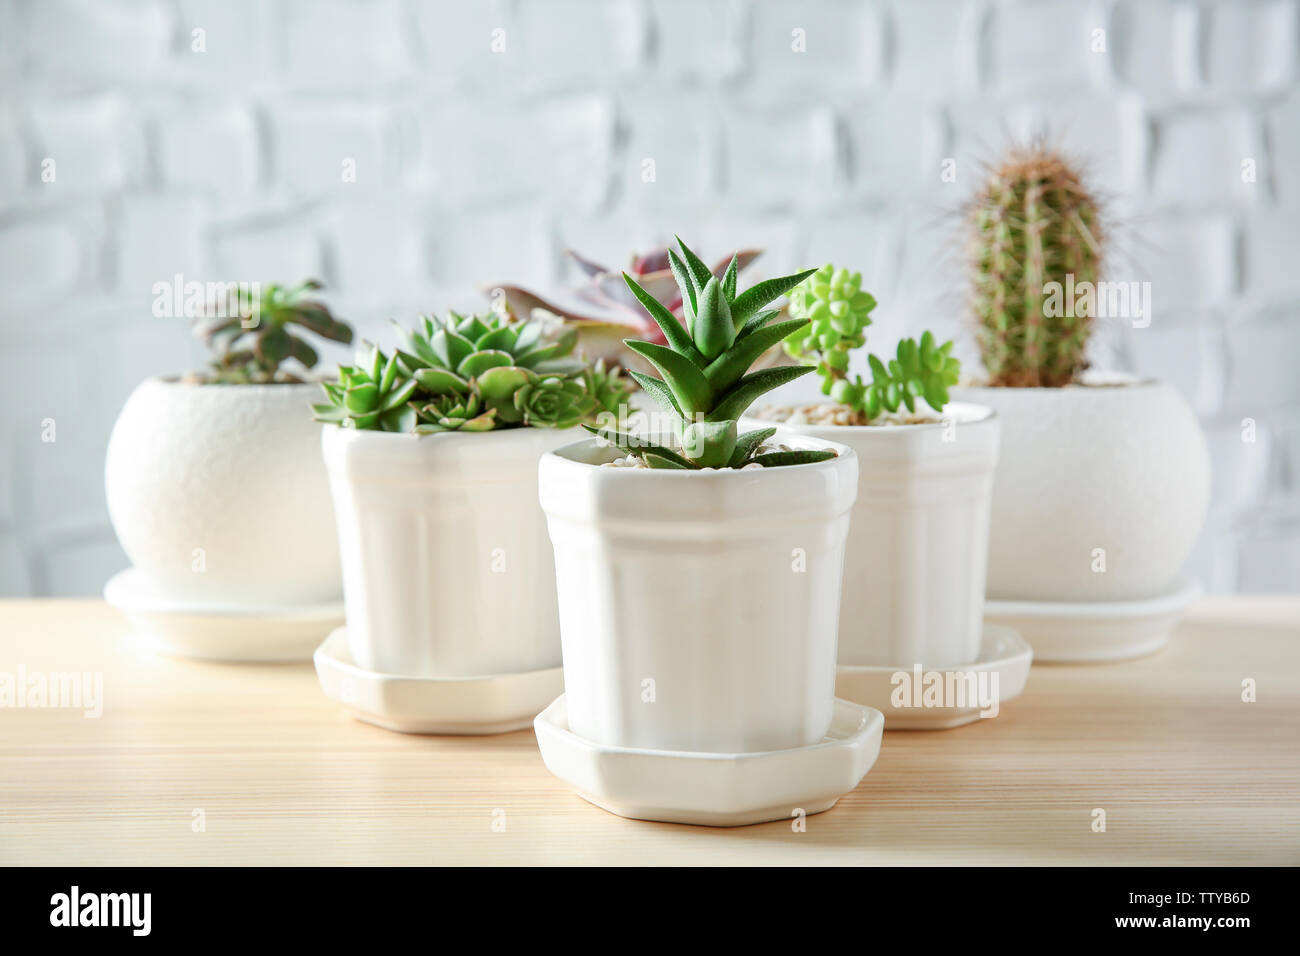 Pots with succulents on table against brick wall background Stock Photo